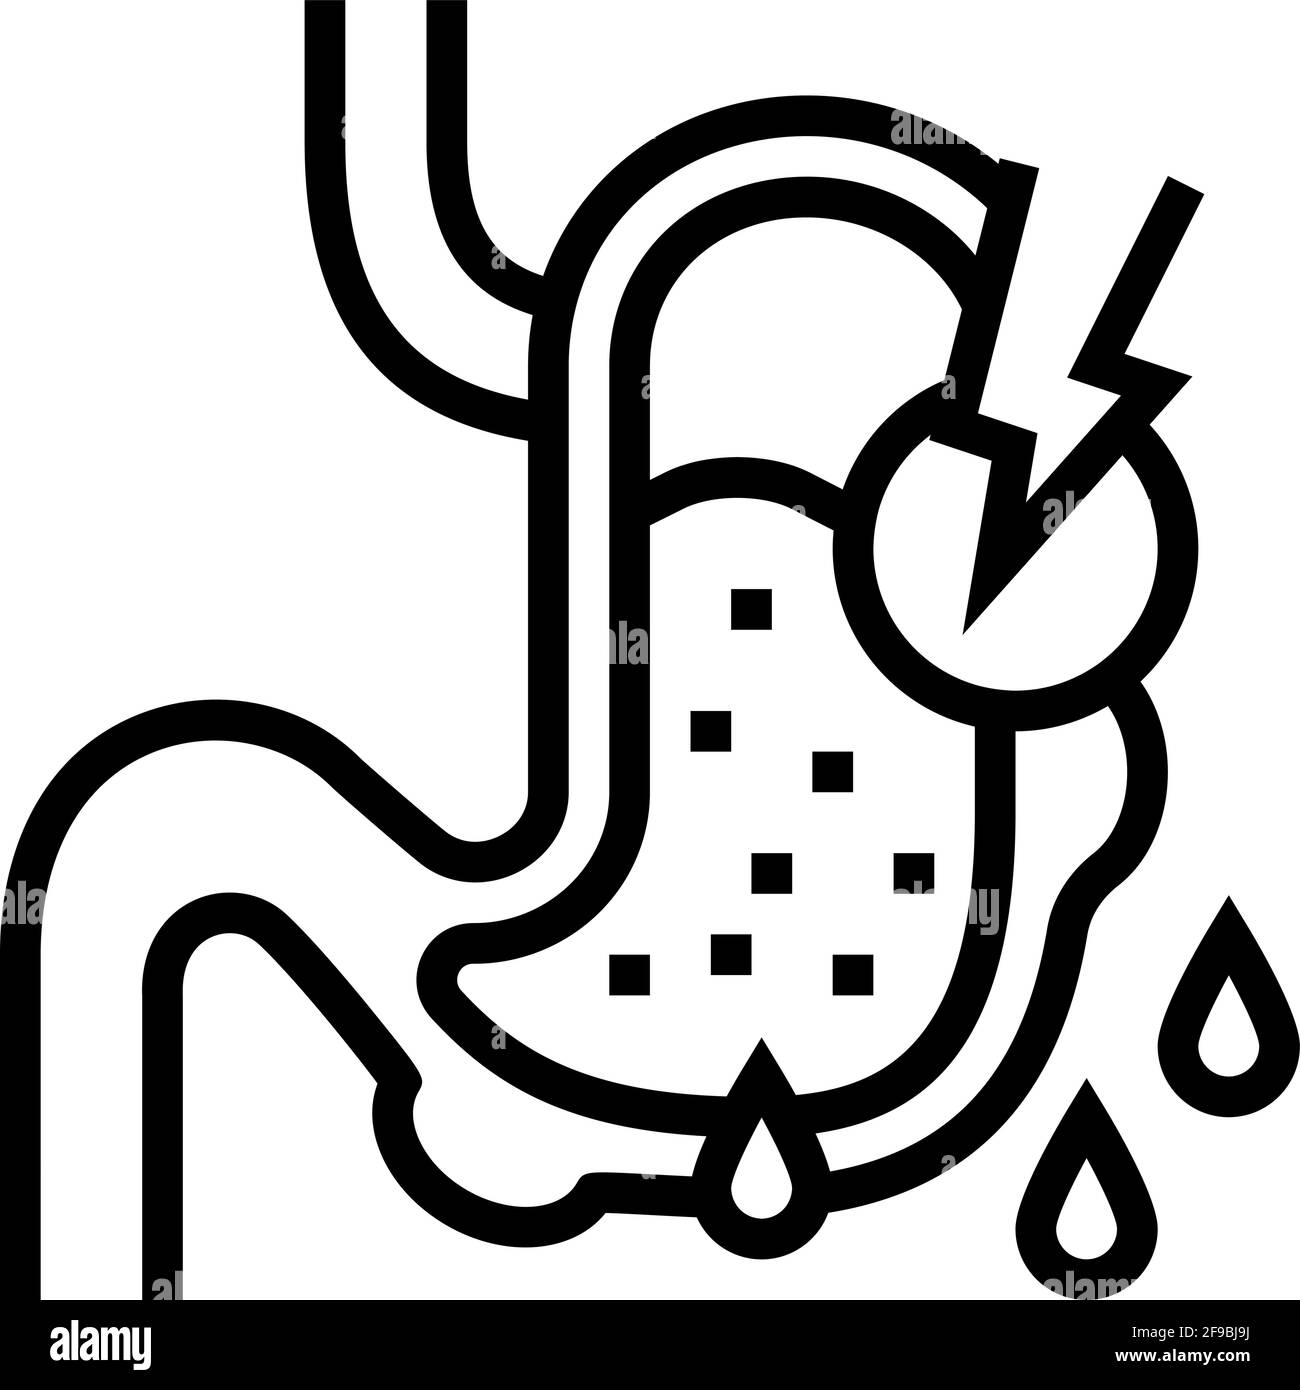 leaks in gastrointestinal system line icon vector illustration Stock Vector